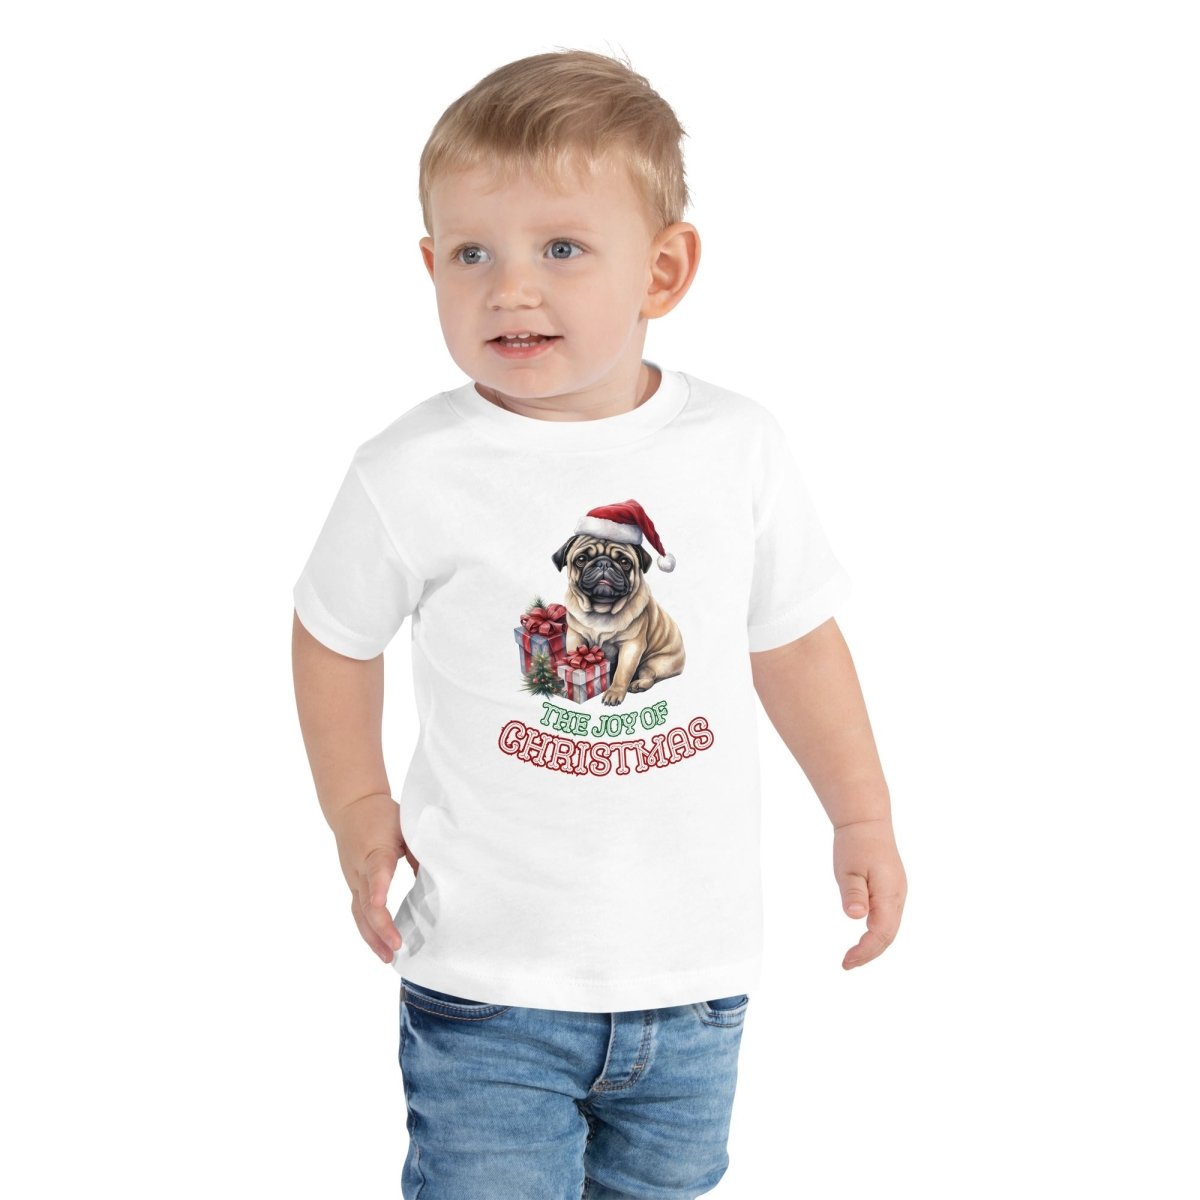 Christmas Pug T-Shirt - High Quality Festive Children T-Shirt, Gift for Kid, Gift for Doglovers, Funny Toddler Xmas Shirt - Everything Pixel